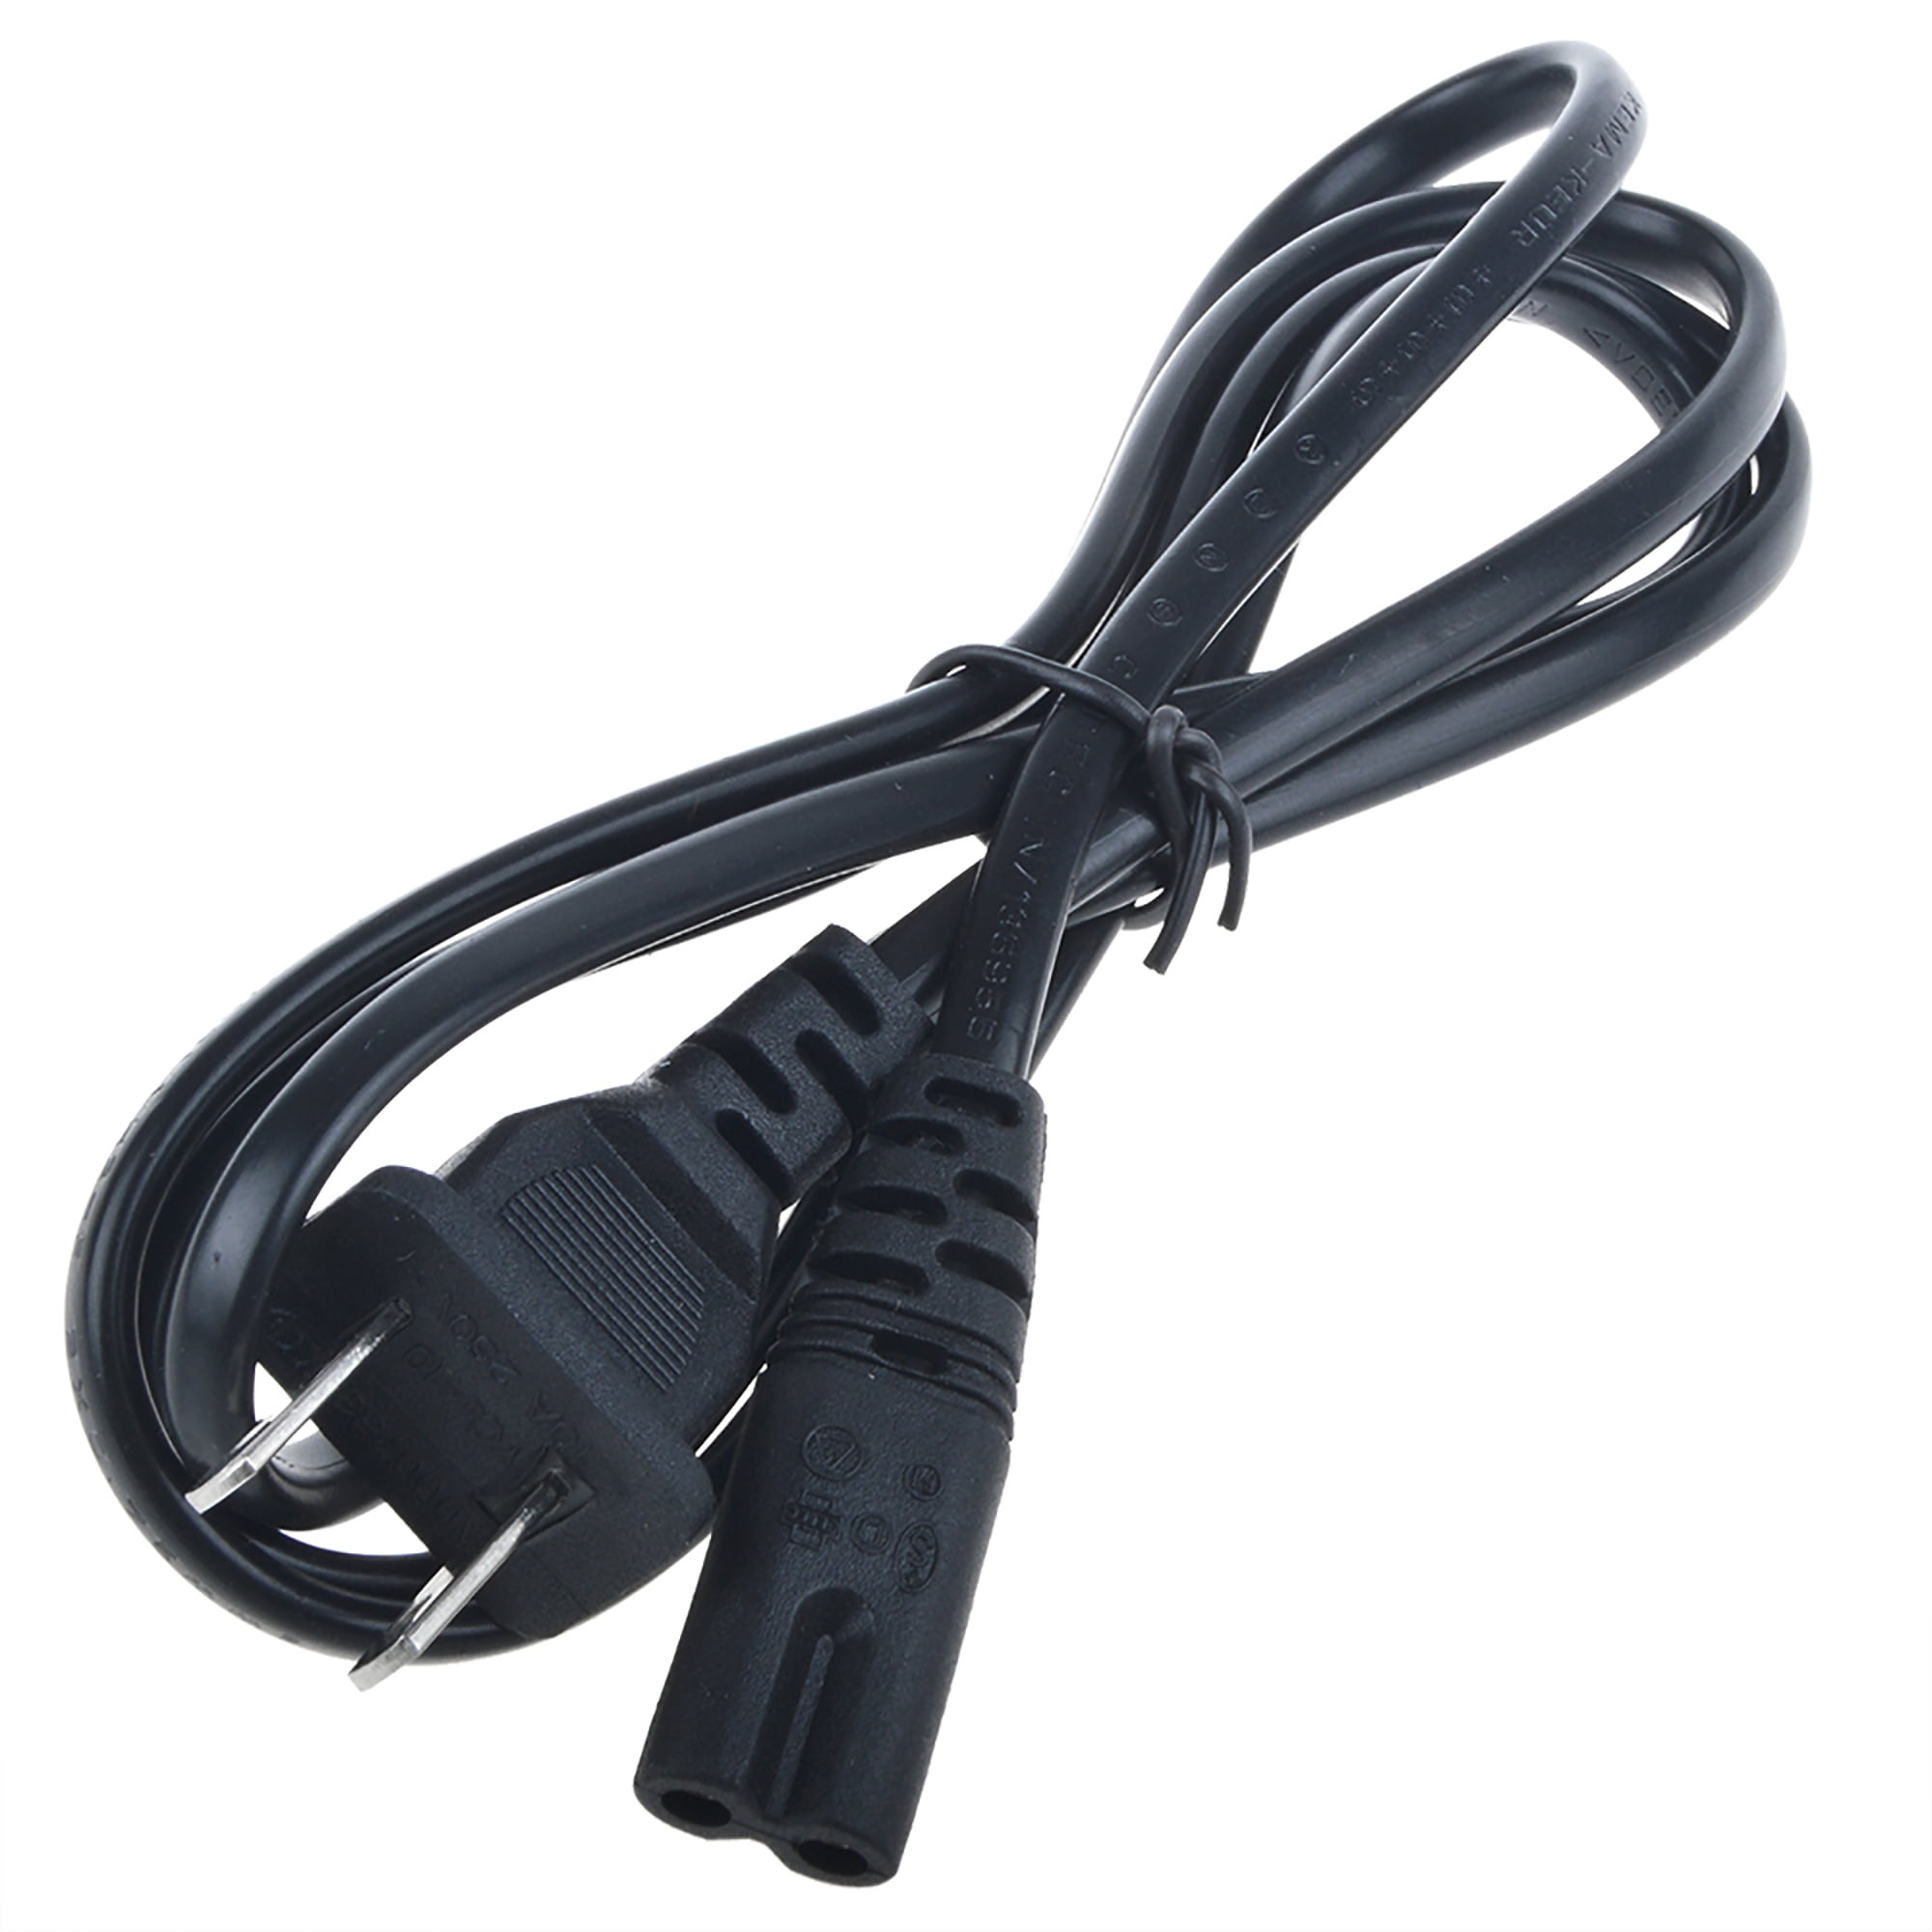 PKPOWER 5ft AC Power Cord For Pixma MP550 MP560 MP600 Printer 2-Prong Lead - Walmart.com